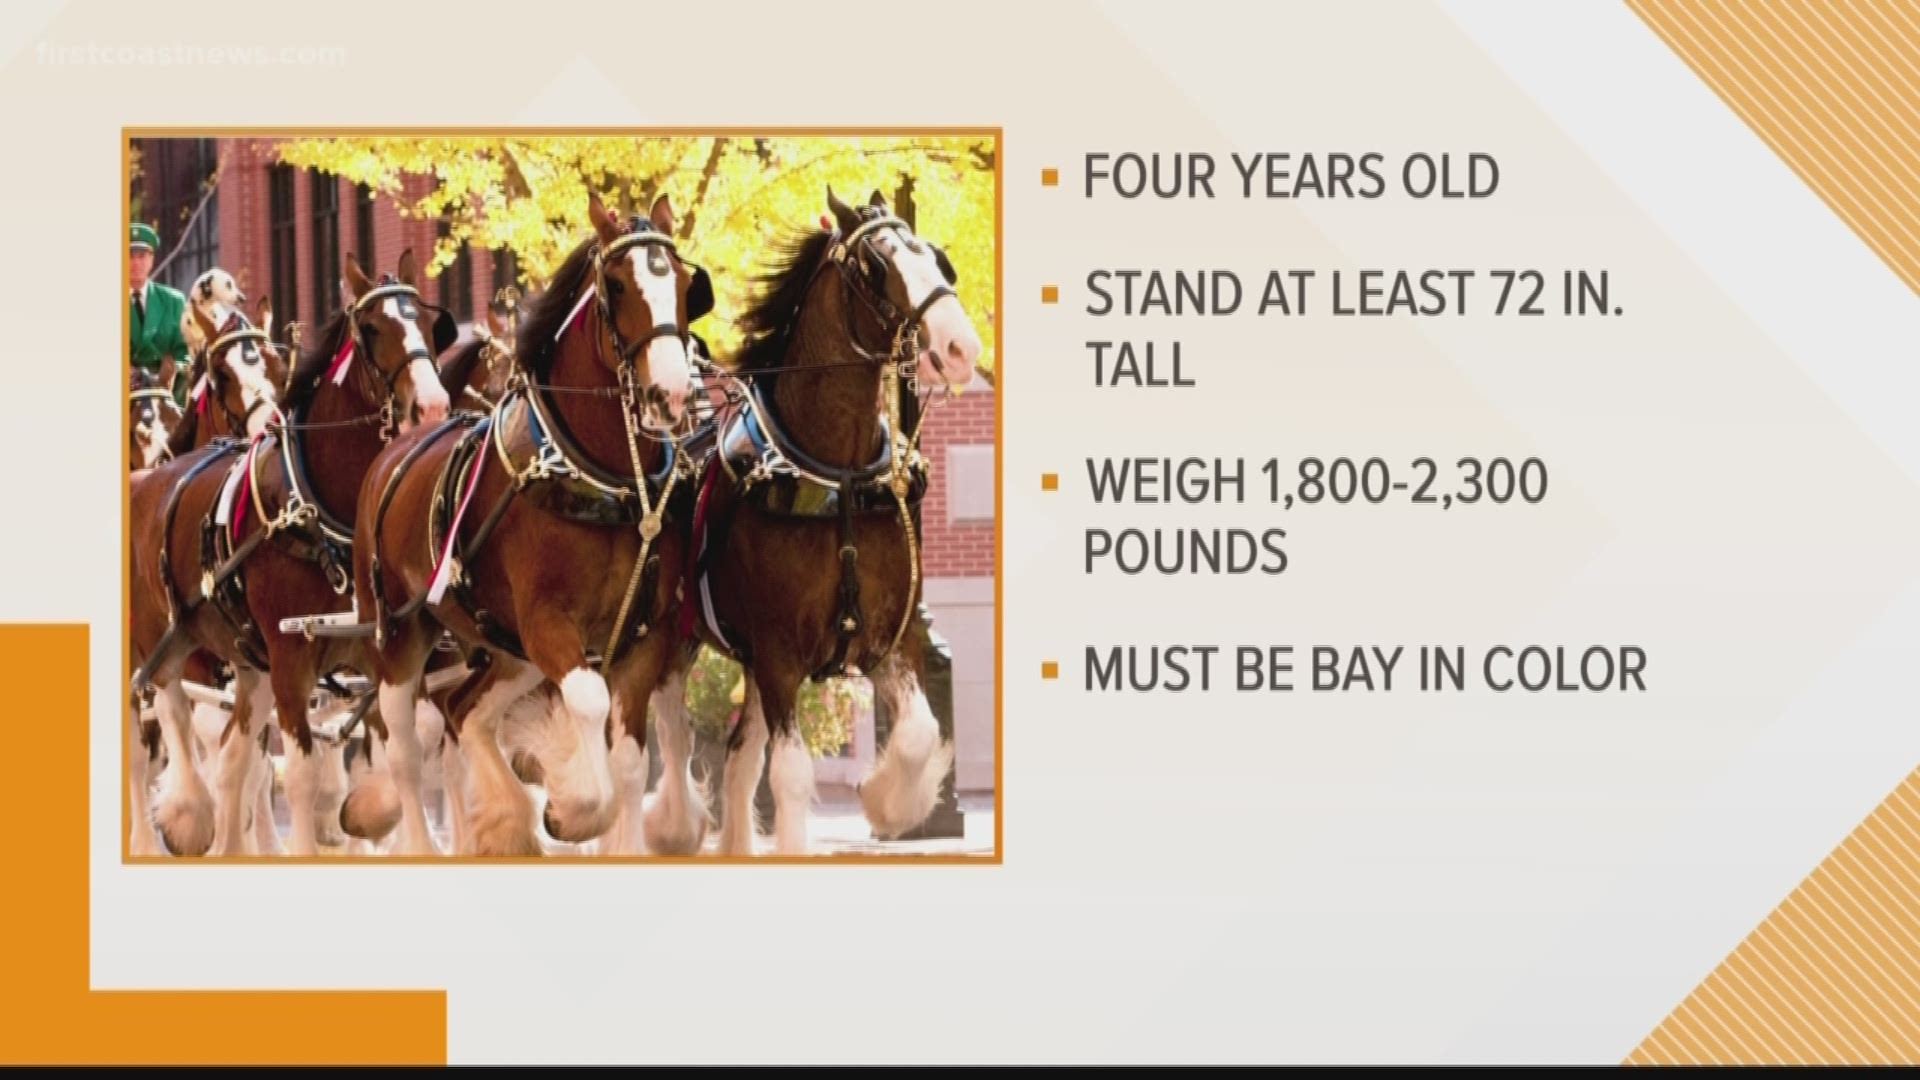 Budweiser Clydesdale have to meet certain criteria to even be considered!